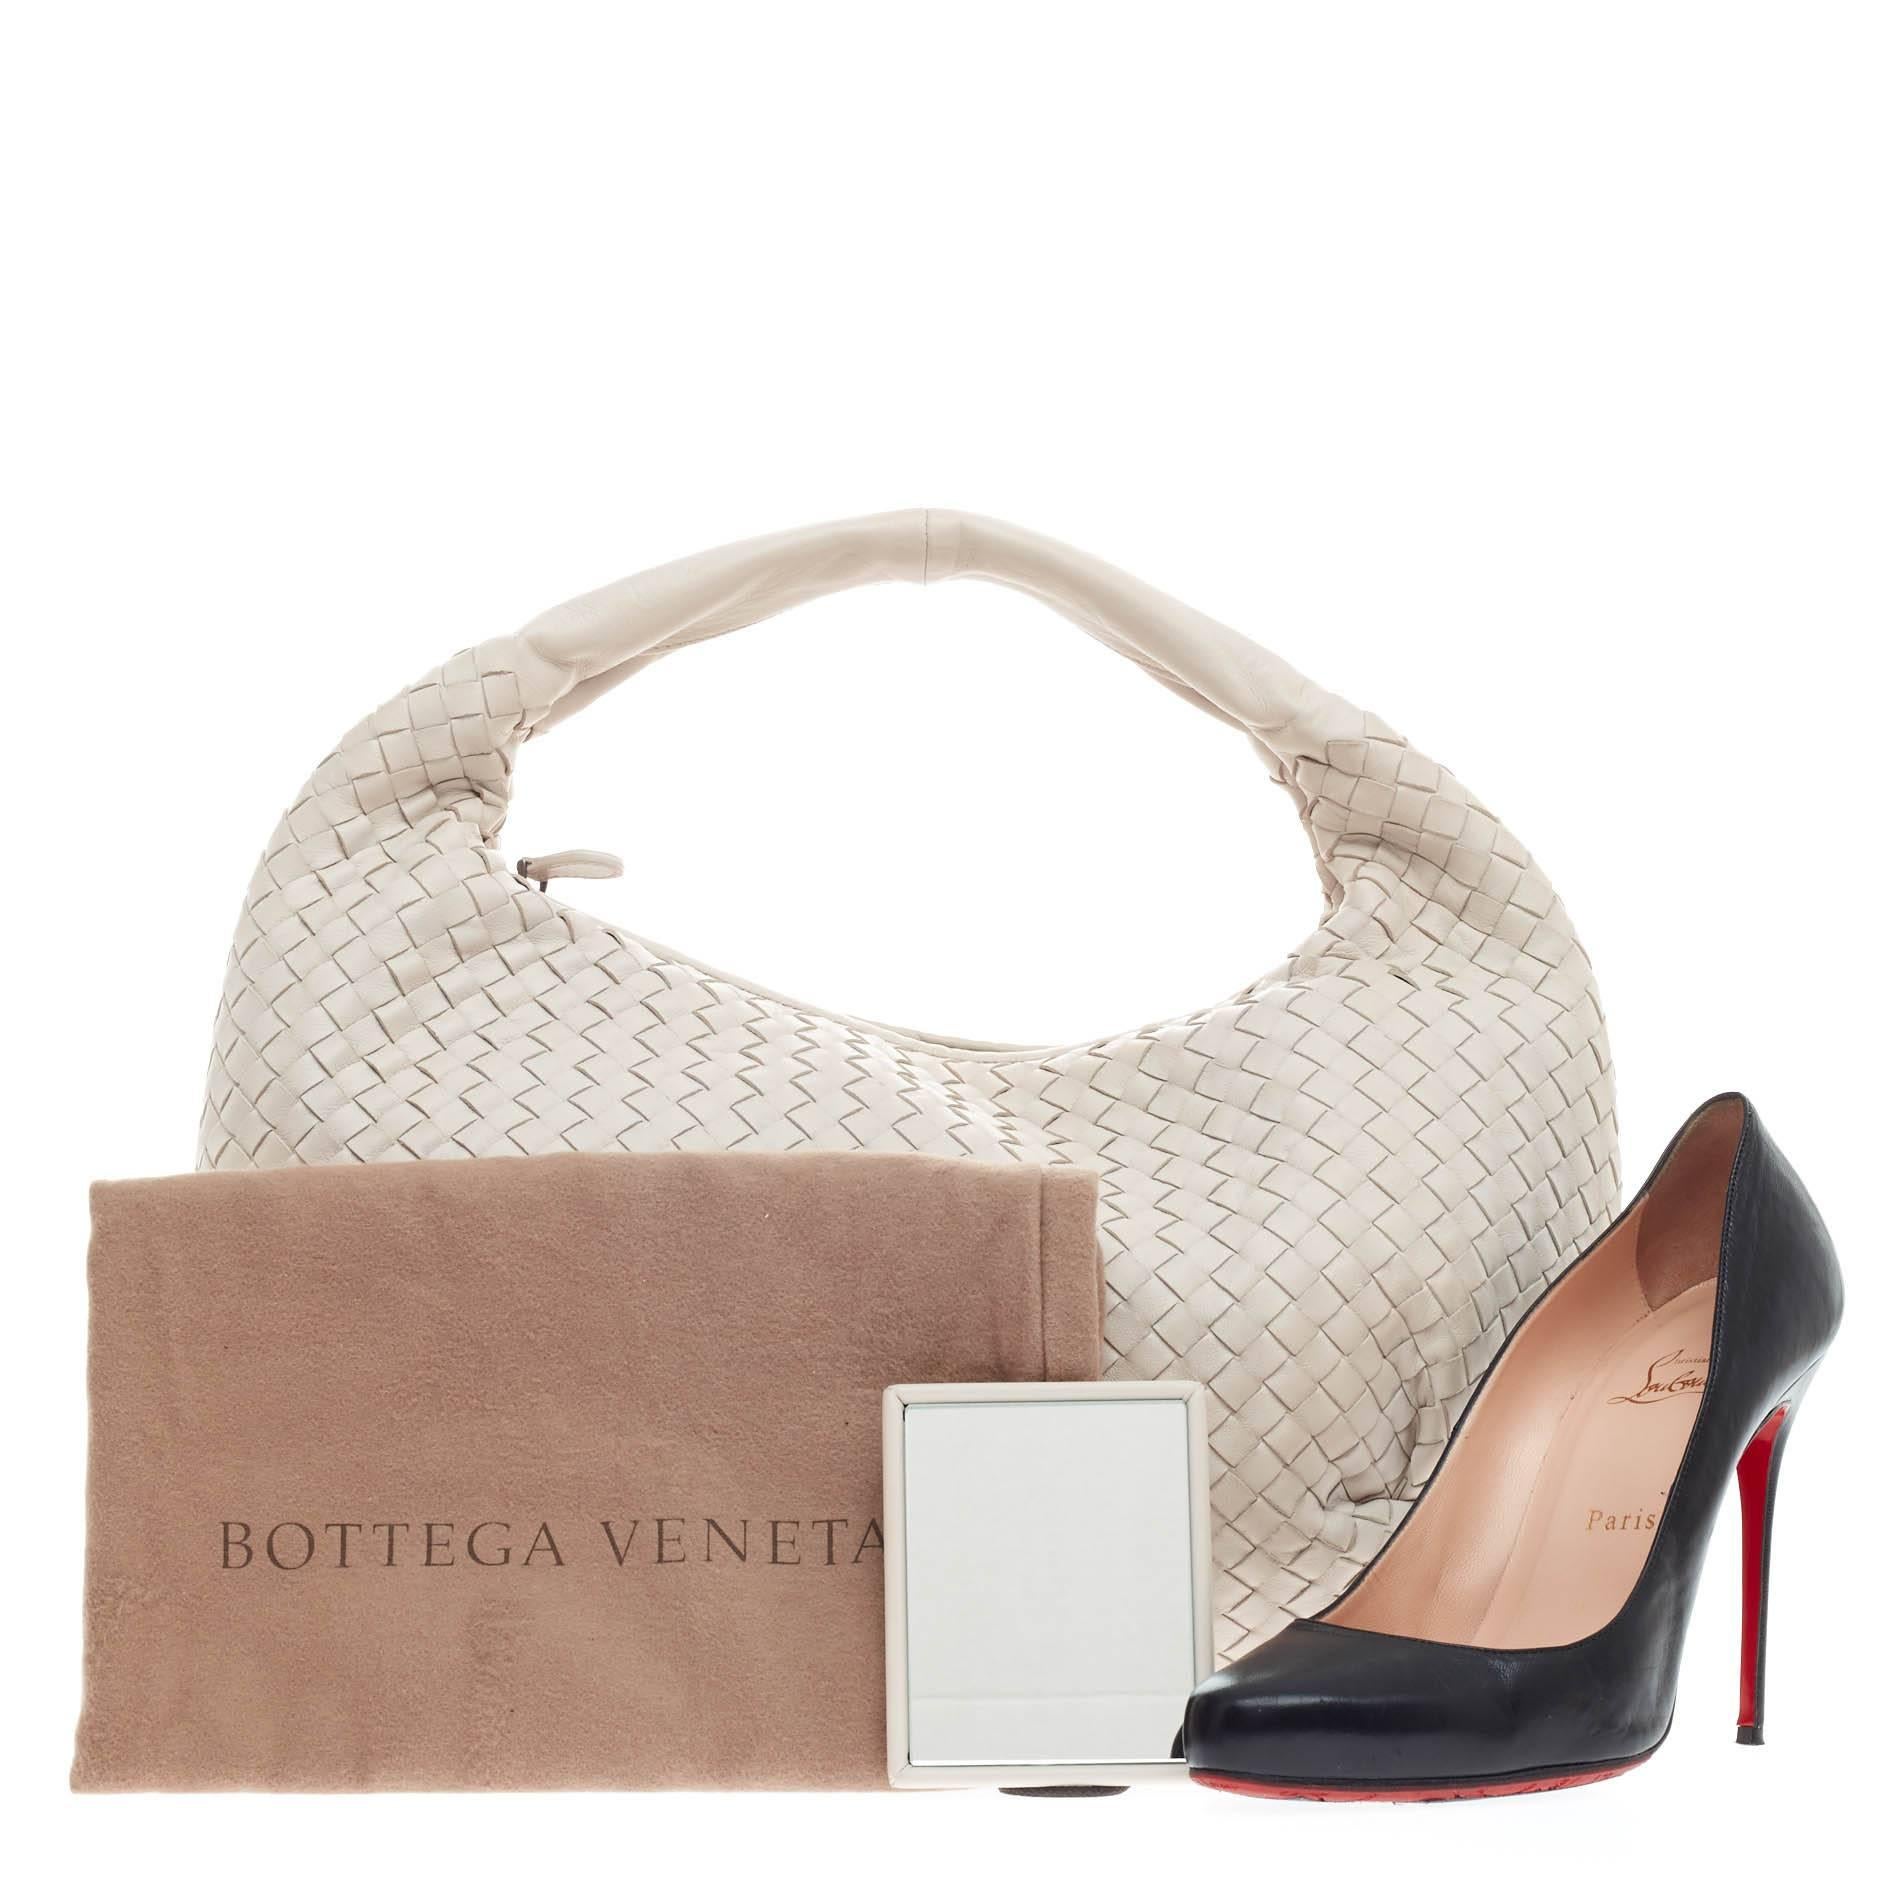 This authentic Bottega Veneta Belly Hobo Intrecciato Nappa Medium is a timelessly elegant bag with a casual silhouette. Constructed from off white nappa leather woven in Bottega Veneta's signature intrecciato method, this functional everyday hobo